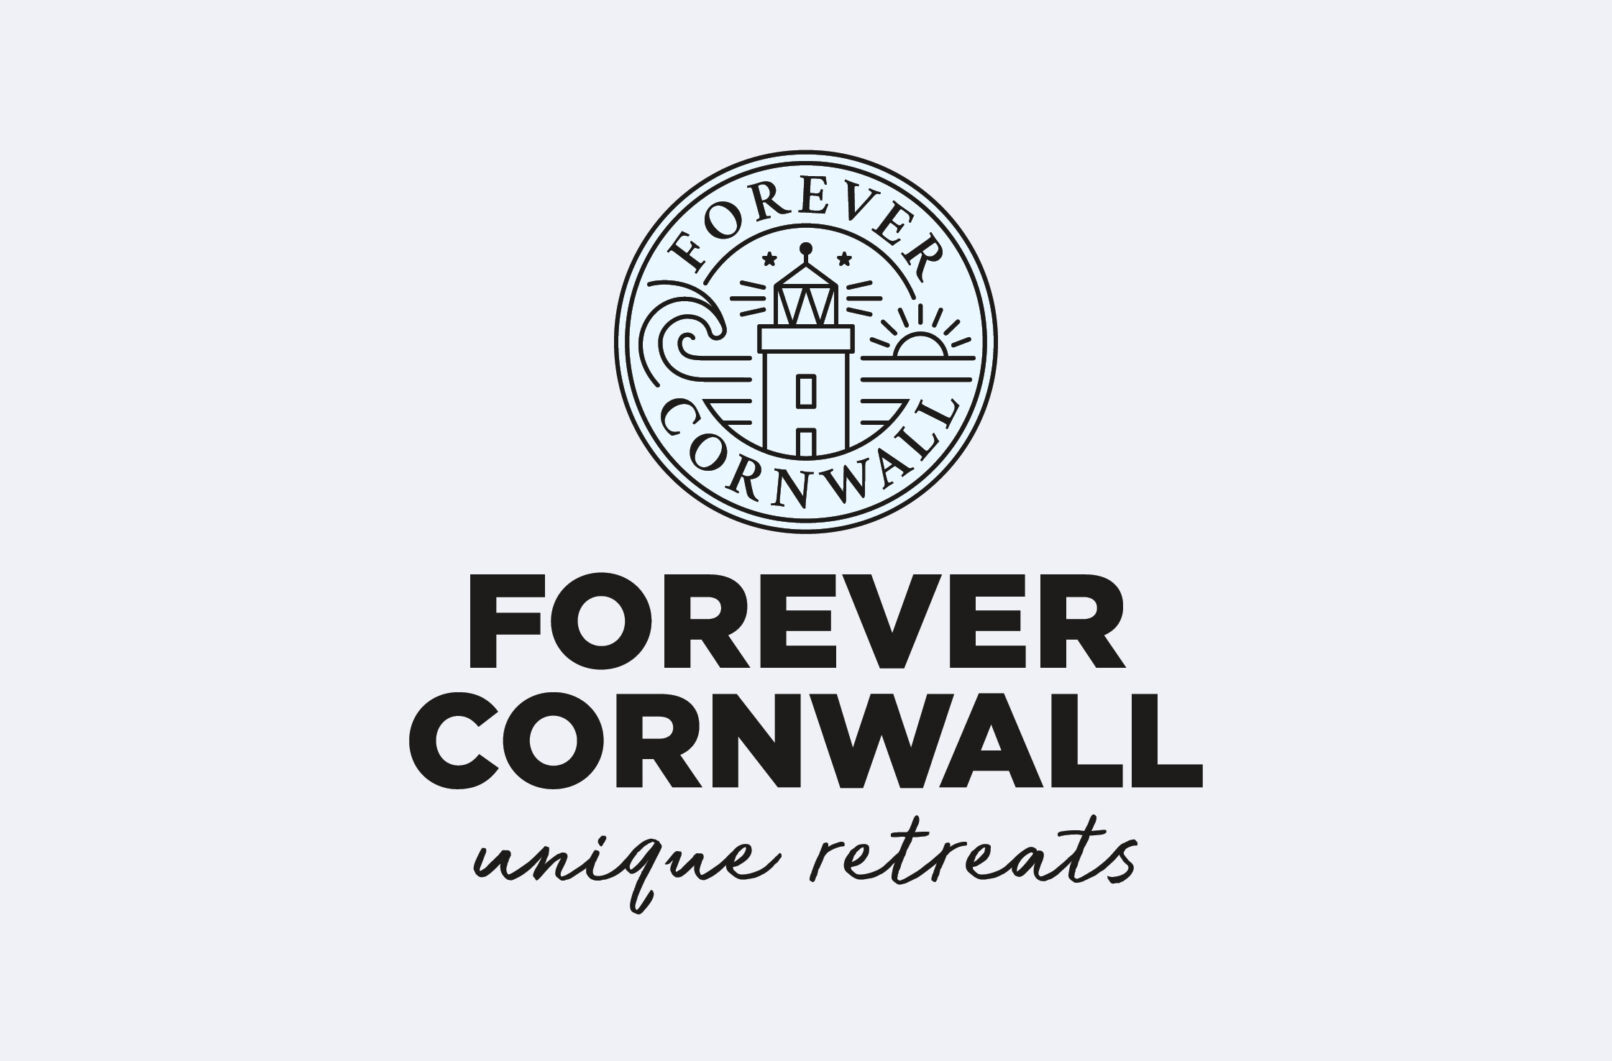 Image showing new Forever Cornwall logo